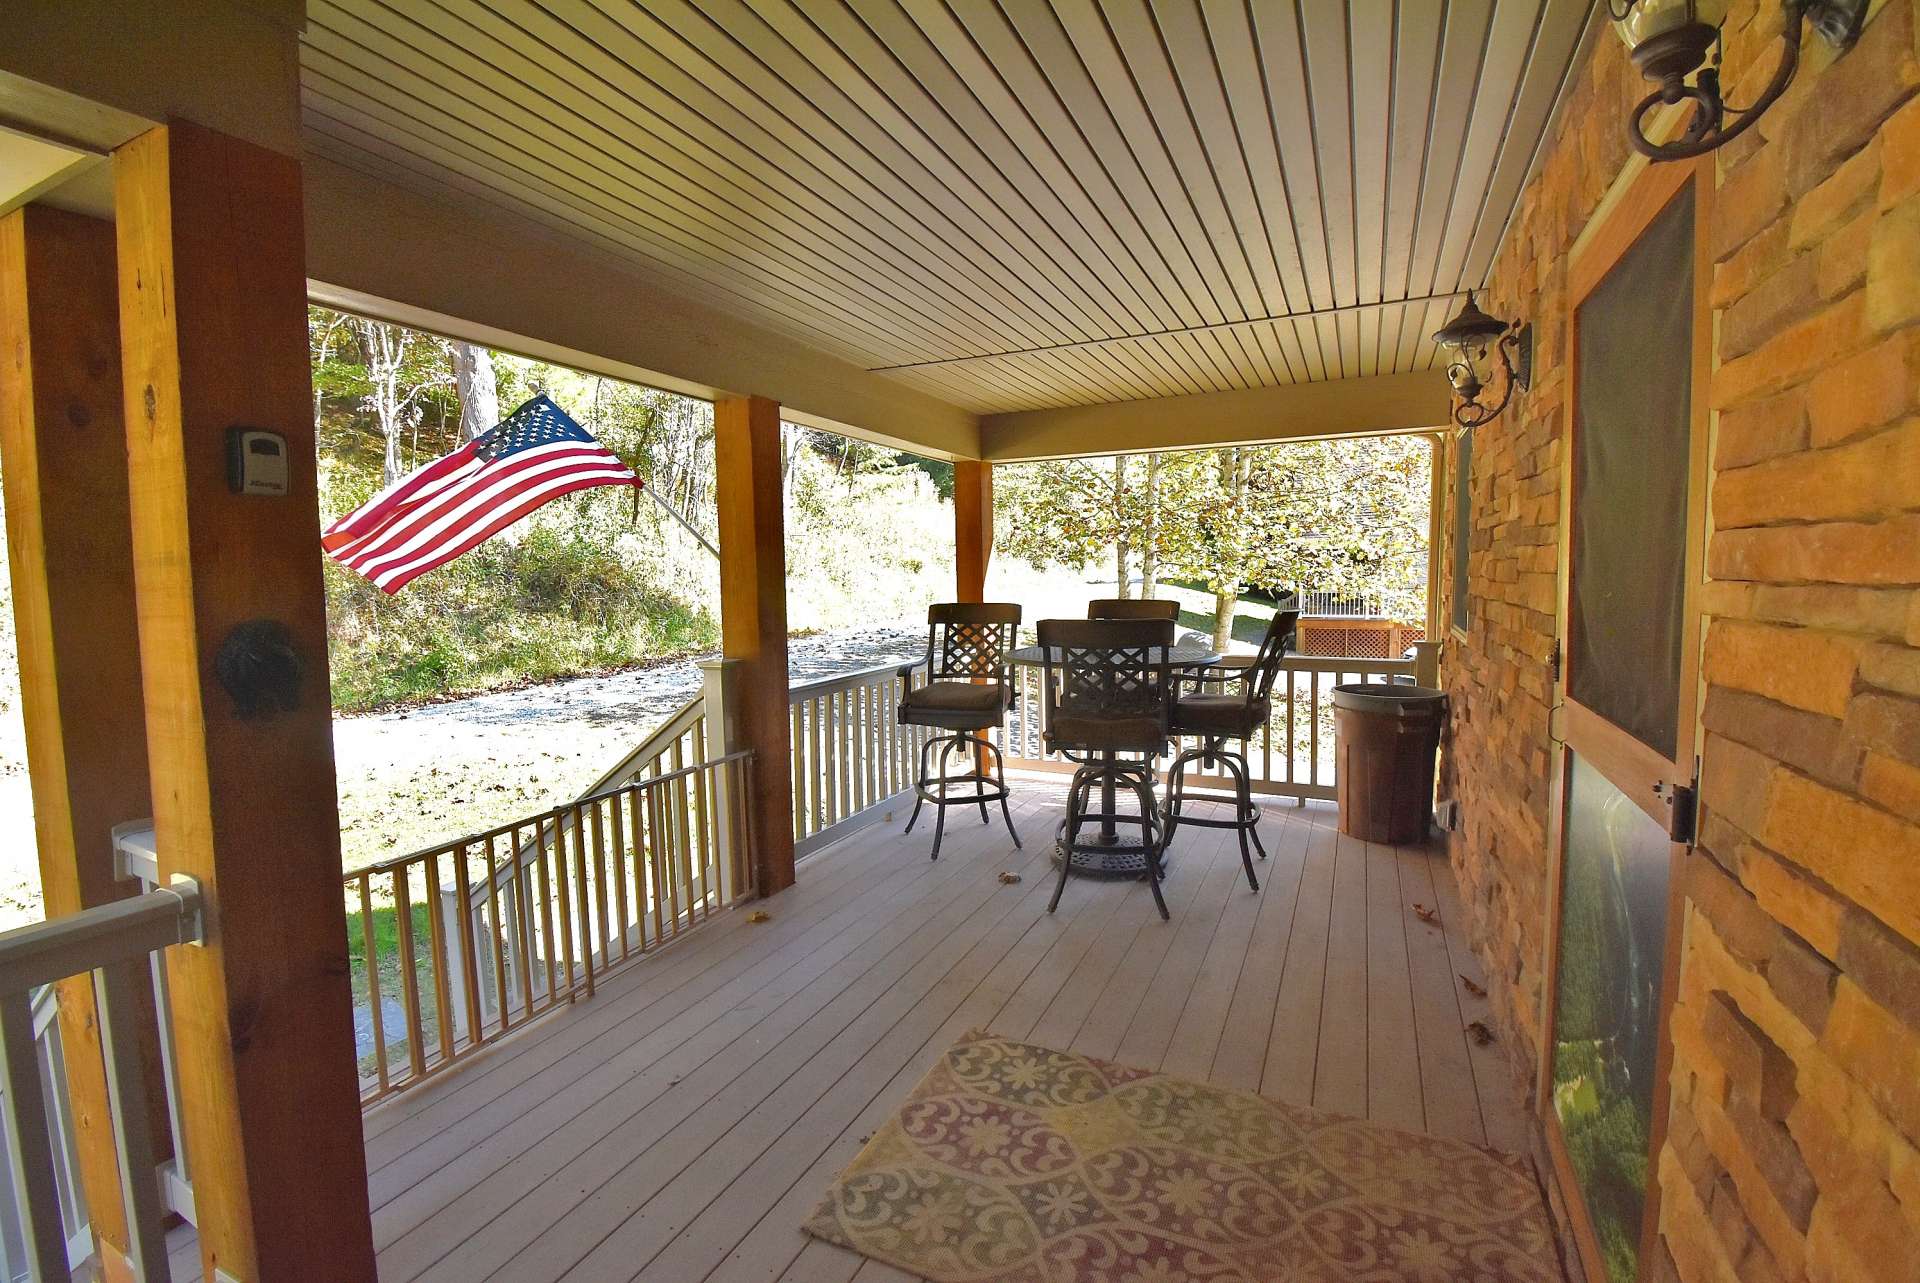 In addition, a full length covered front porch welcomes you and your guests, and also provides additional outdoor entertaining space.